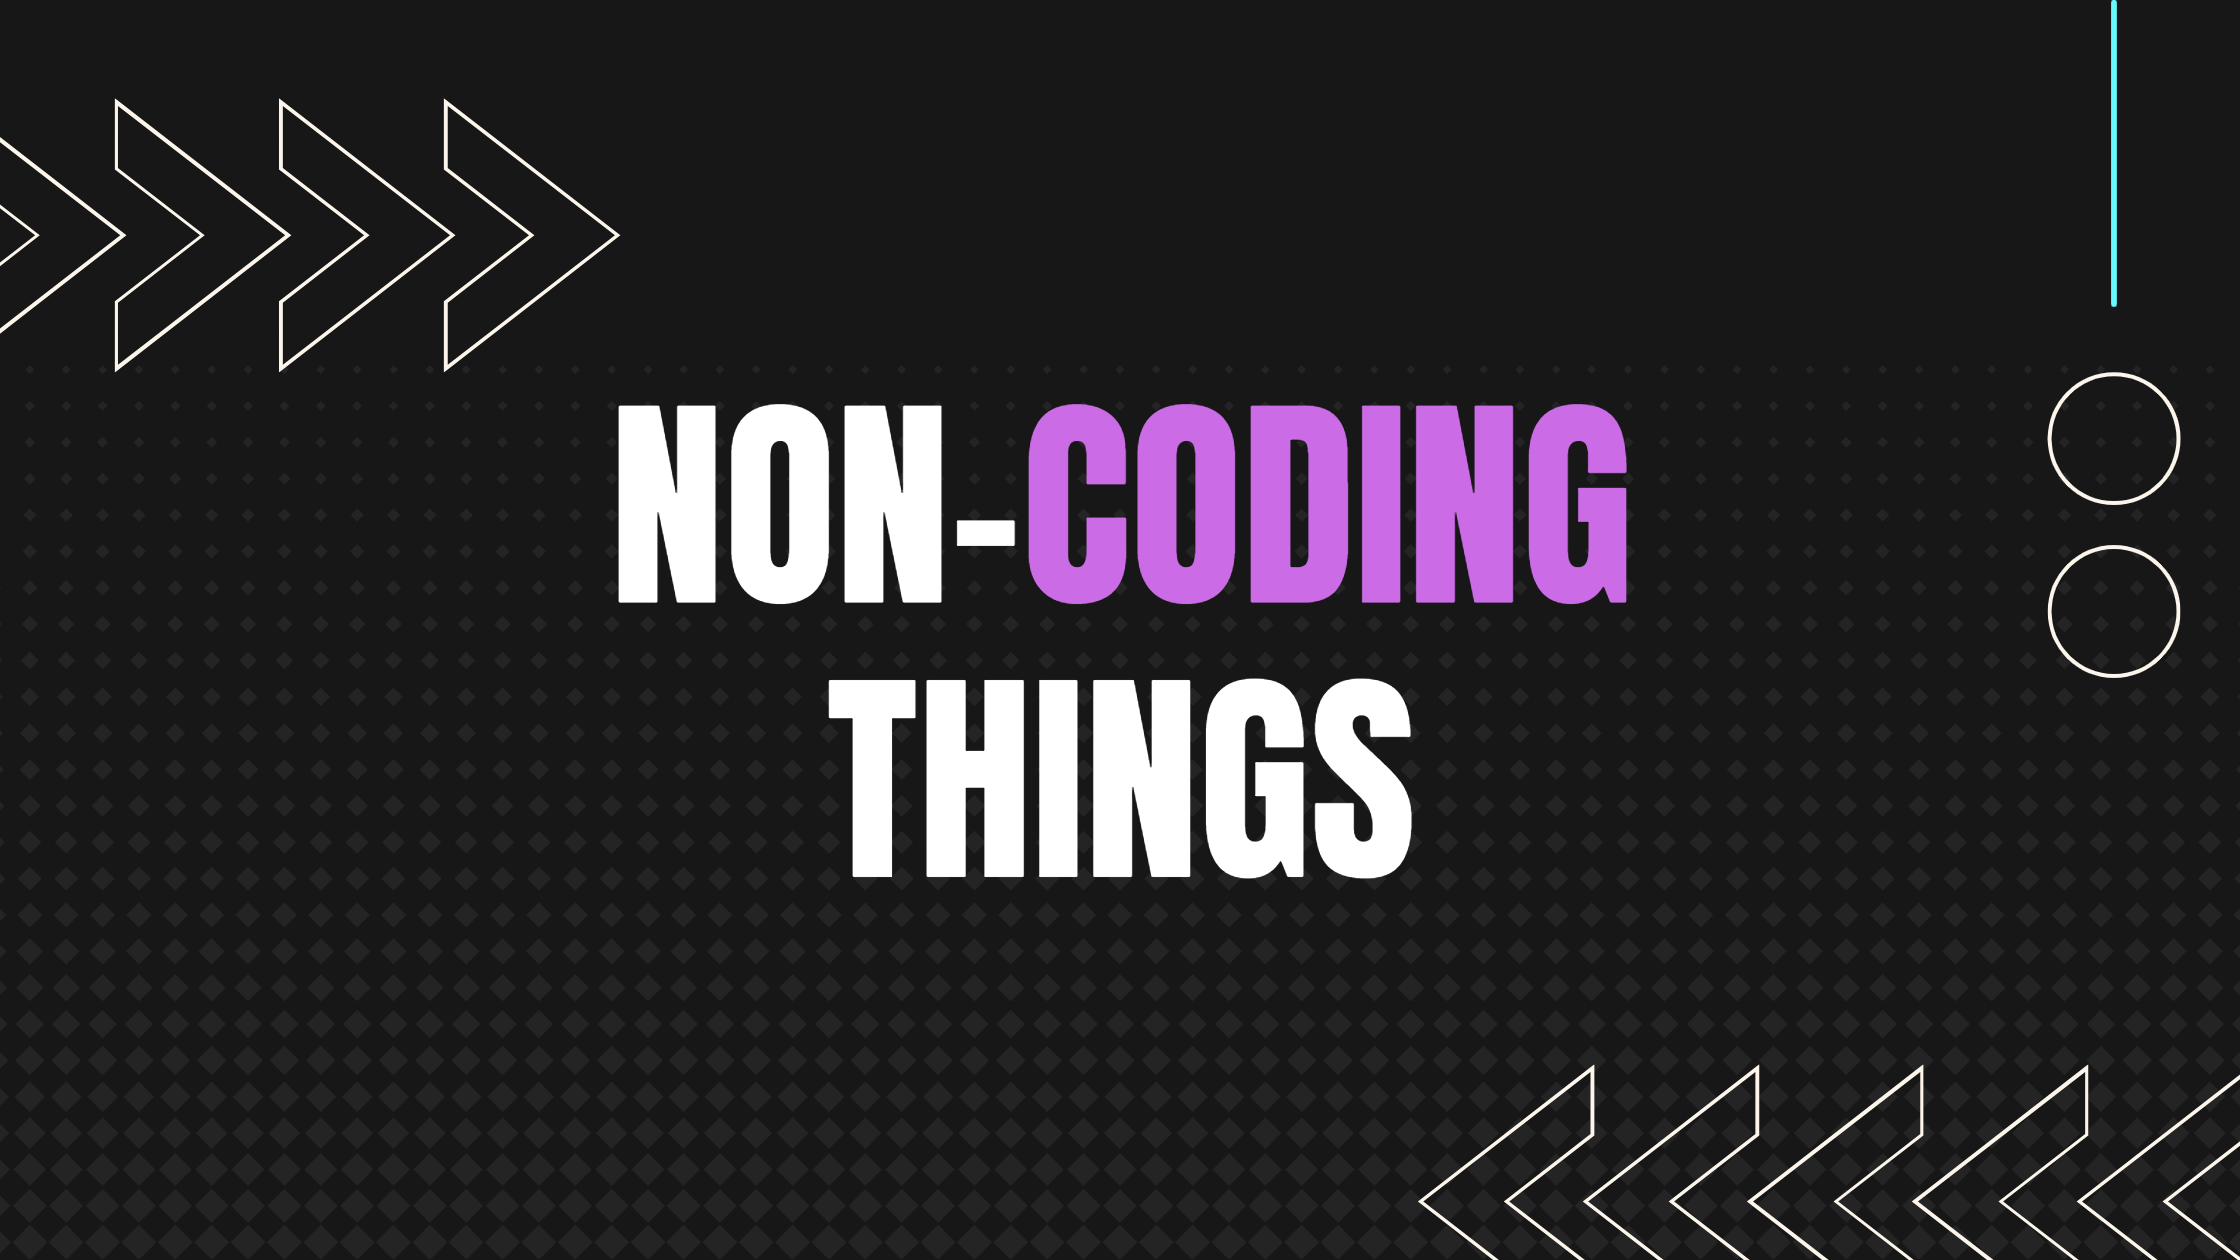 Non-coding things every developer should know
